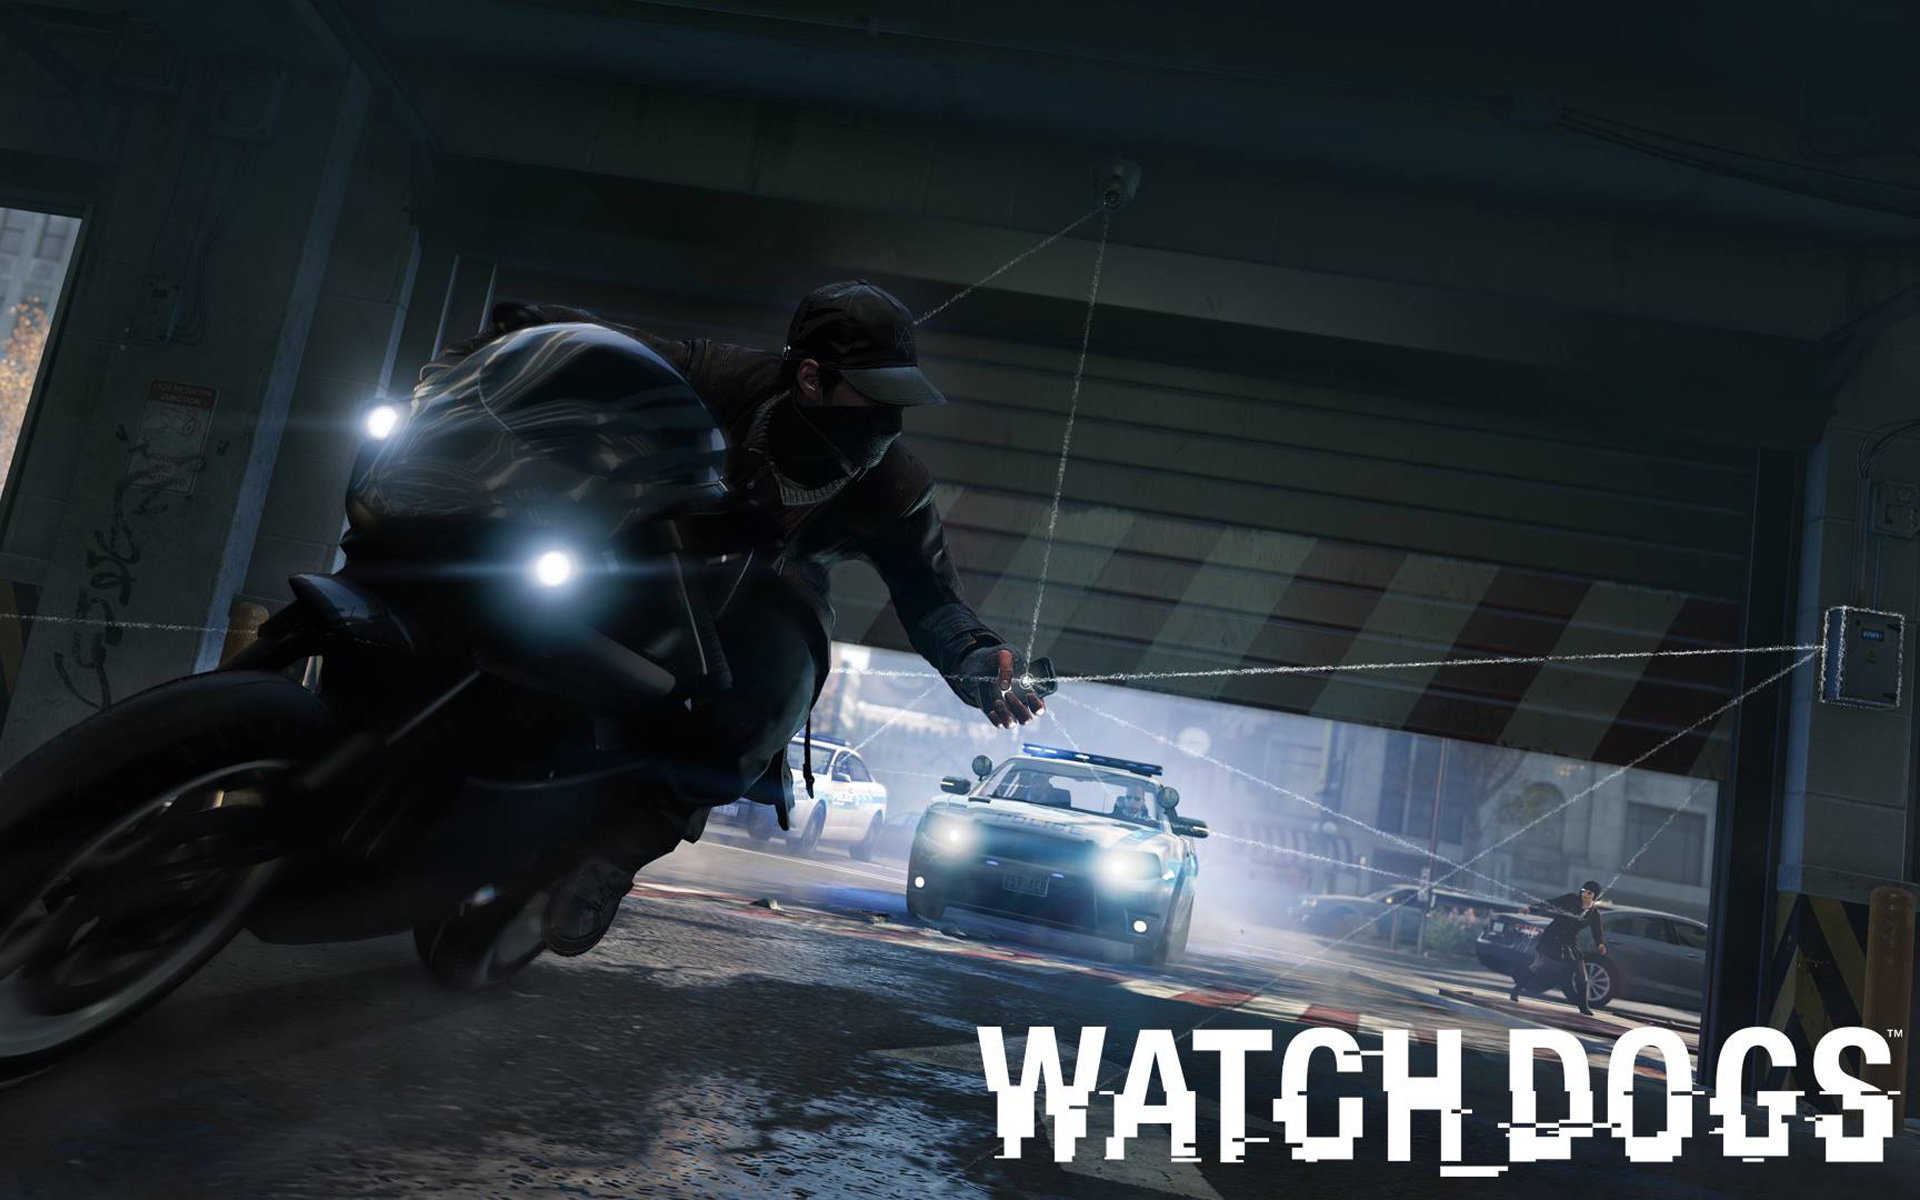 Best Watch Dogs wallpaper ID:117337 for High Resolution hd 1920x1200 computer